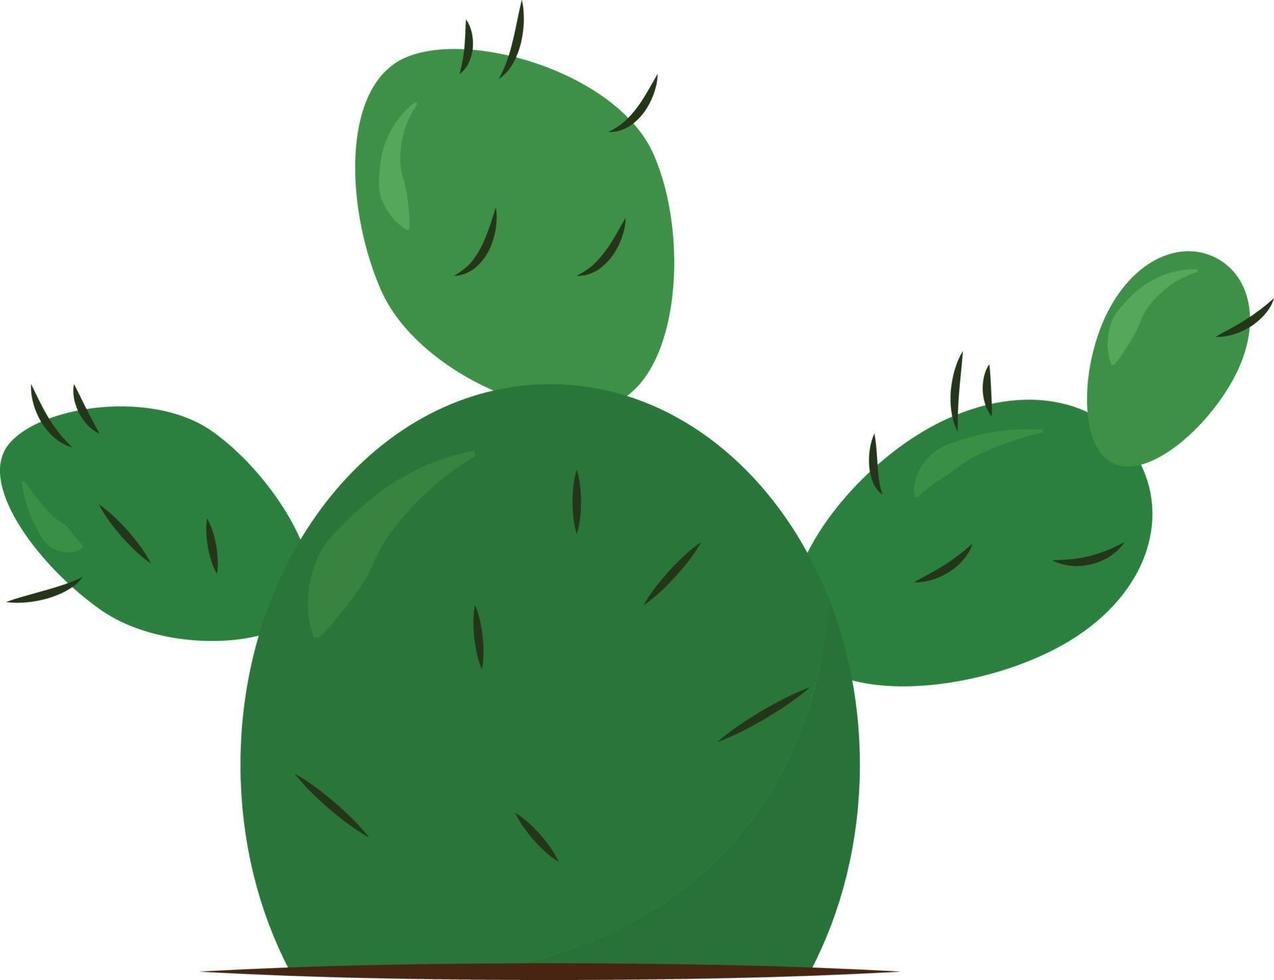 Green cactus, illustration, vector on white background.